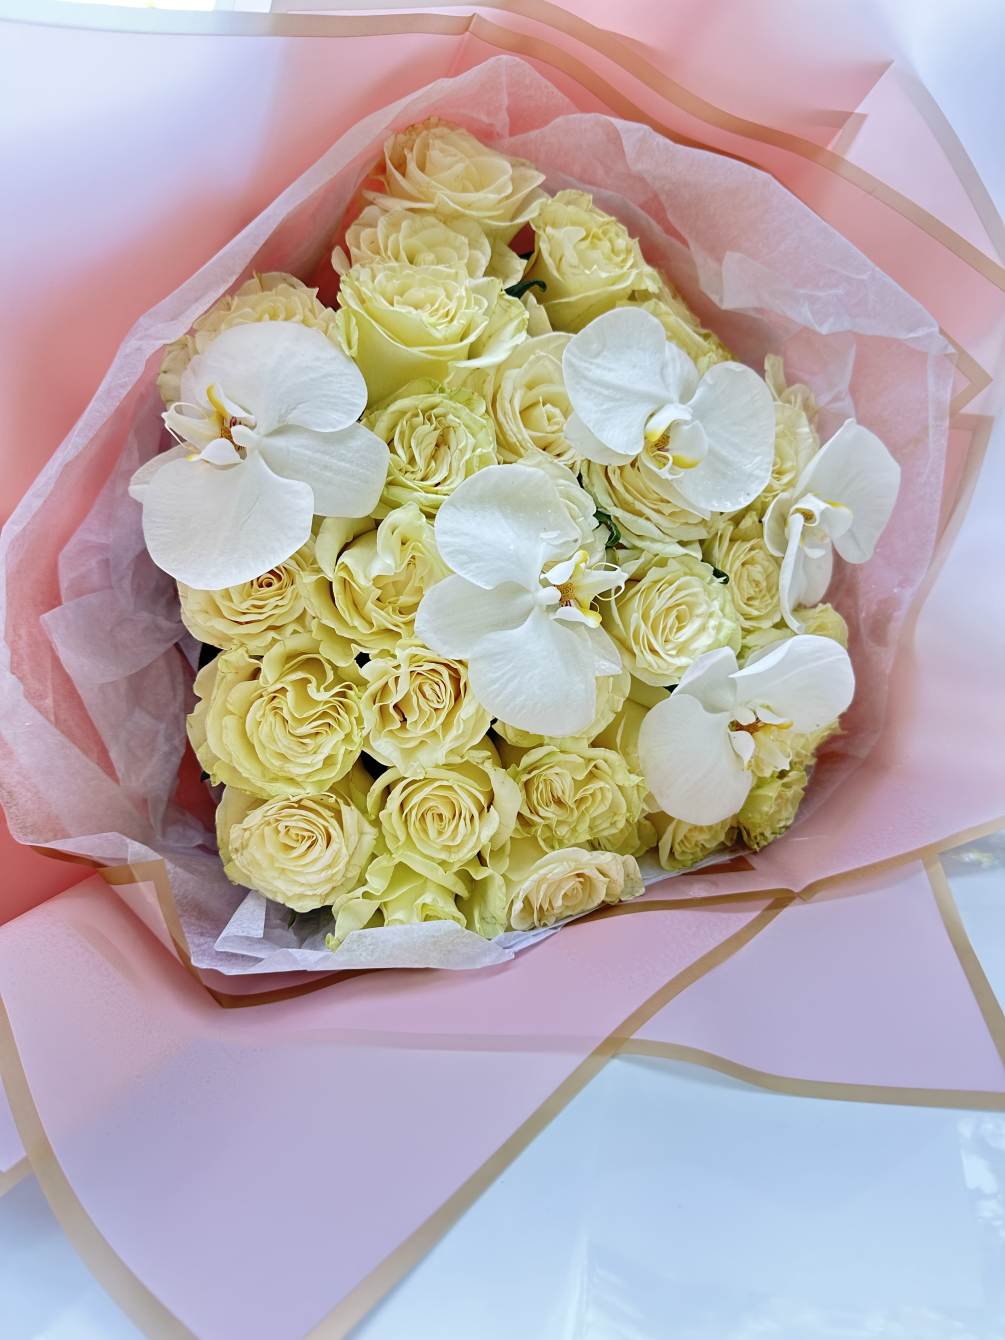 White Mondial roses united with orchids in a beautiful hand tied bouquet